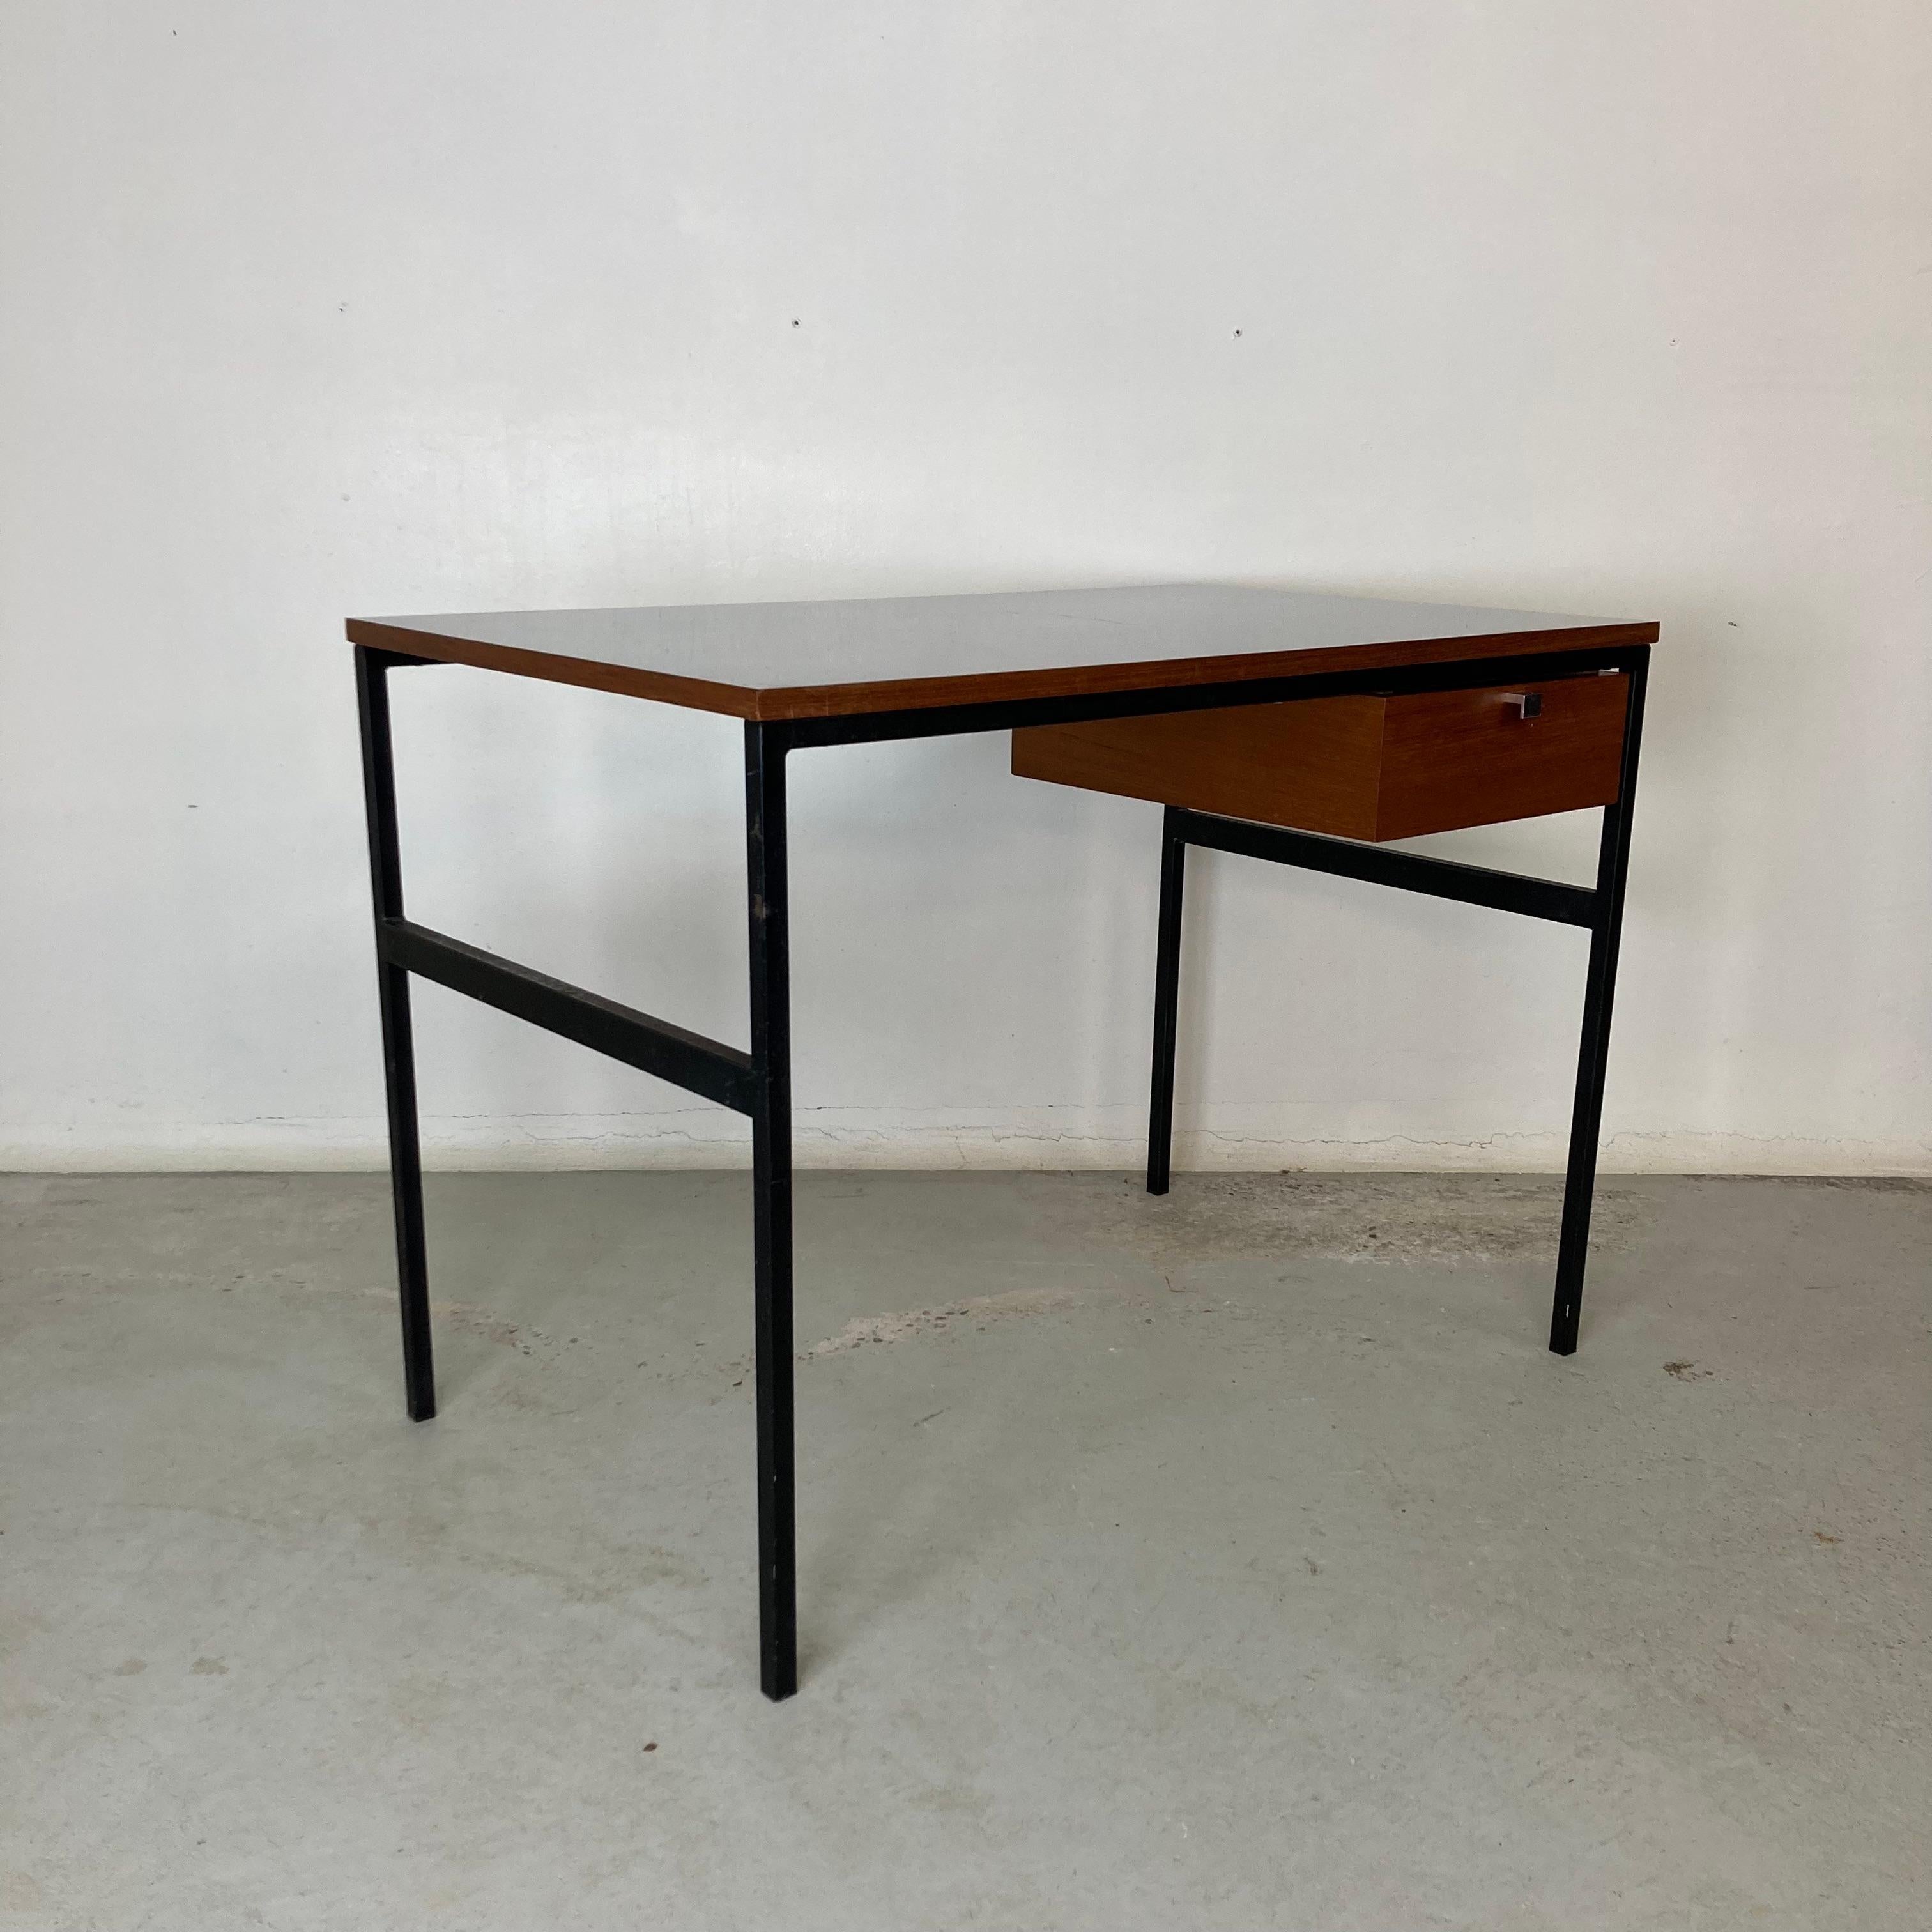 Lacquered Pierre Paulin & Thonet Desk with Drawer, Metal Teak & Formica, France Circa 1955 For Sale